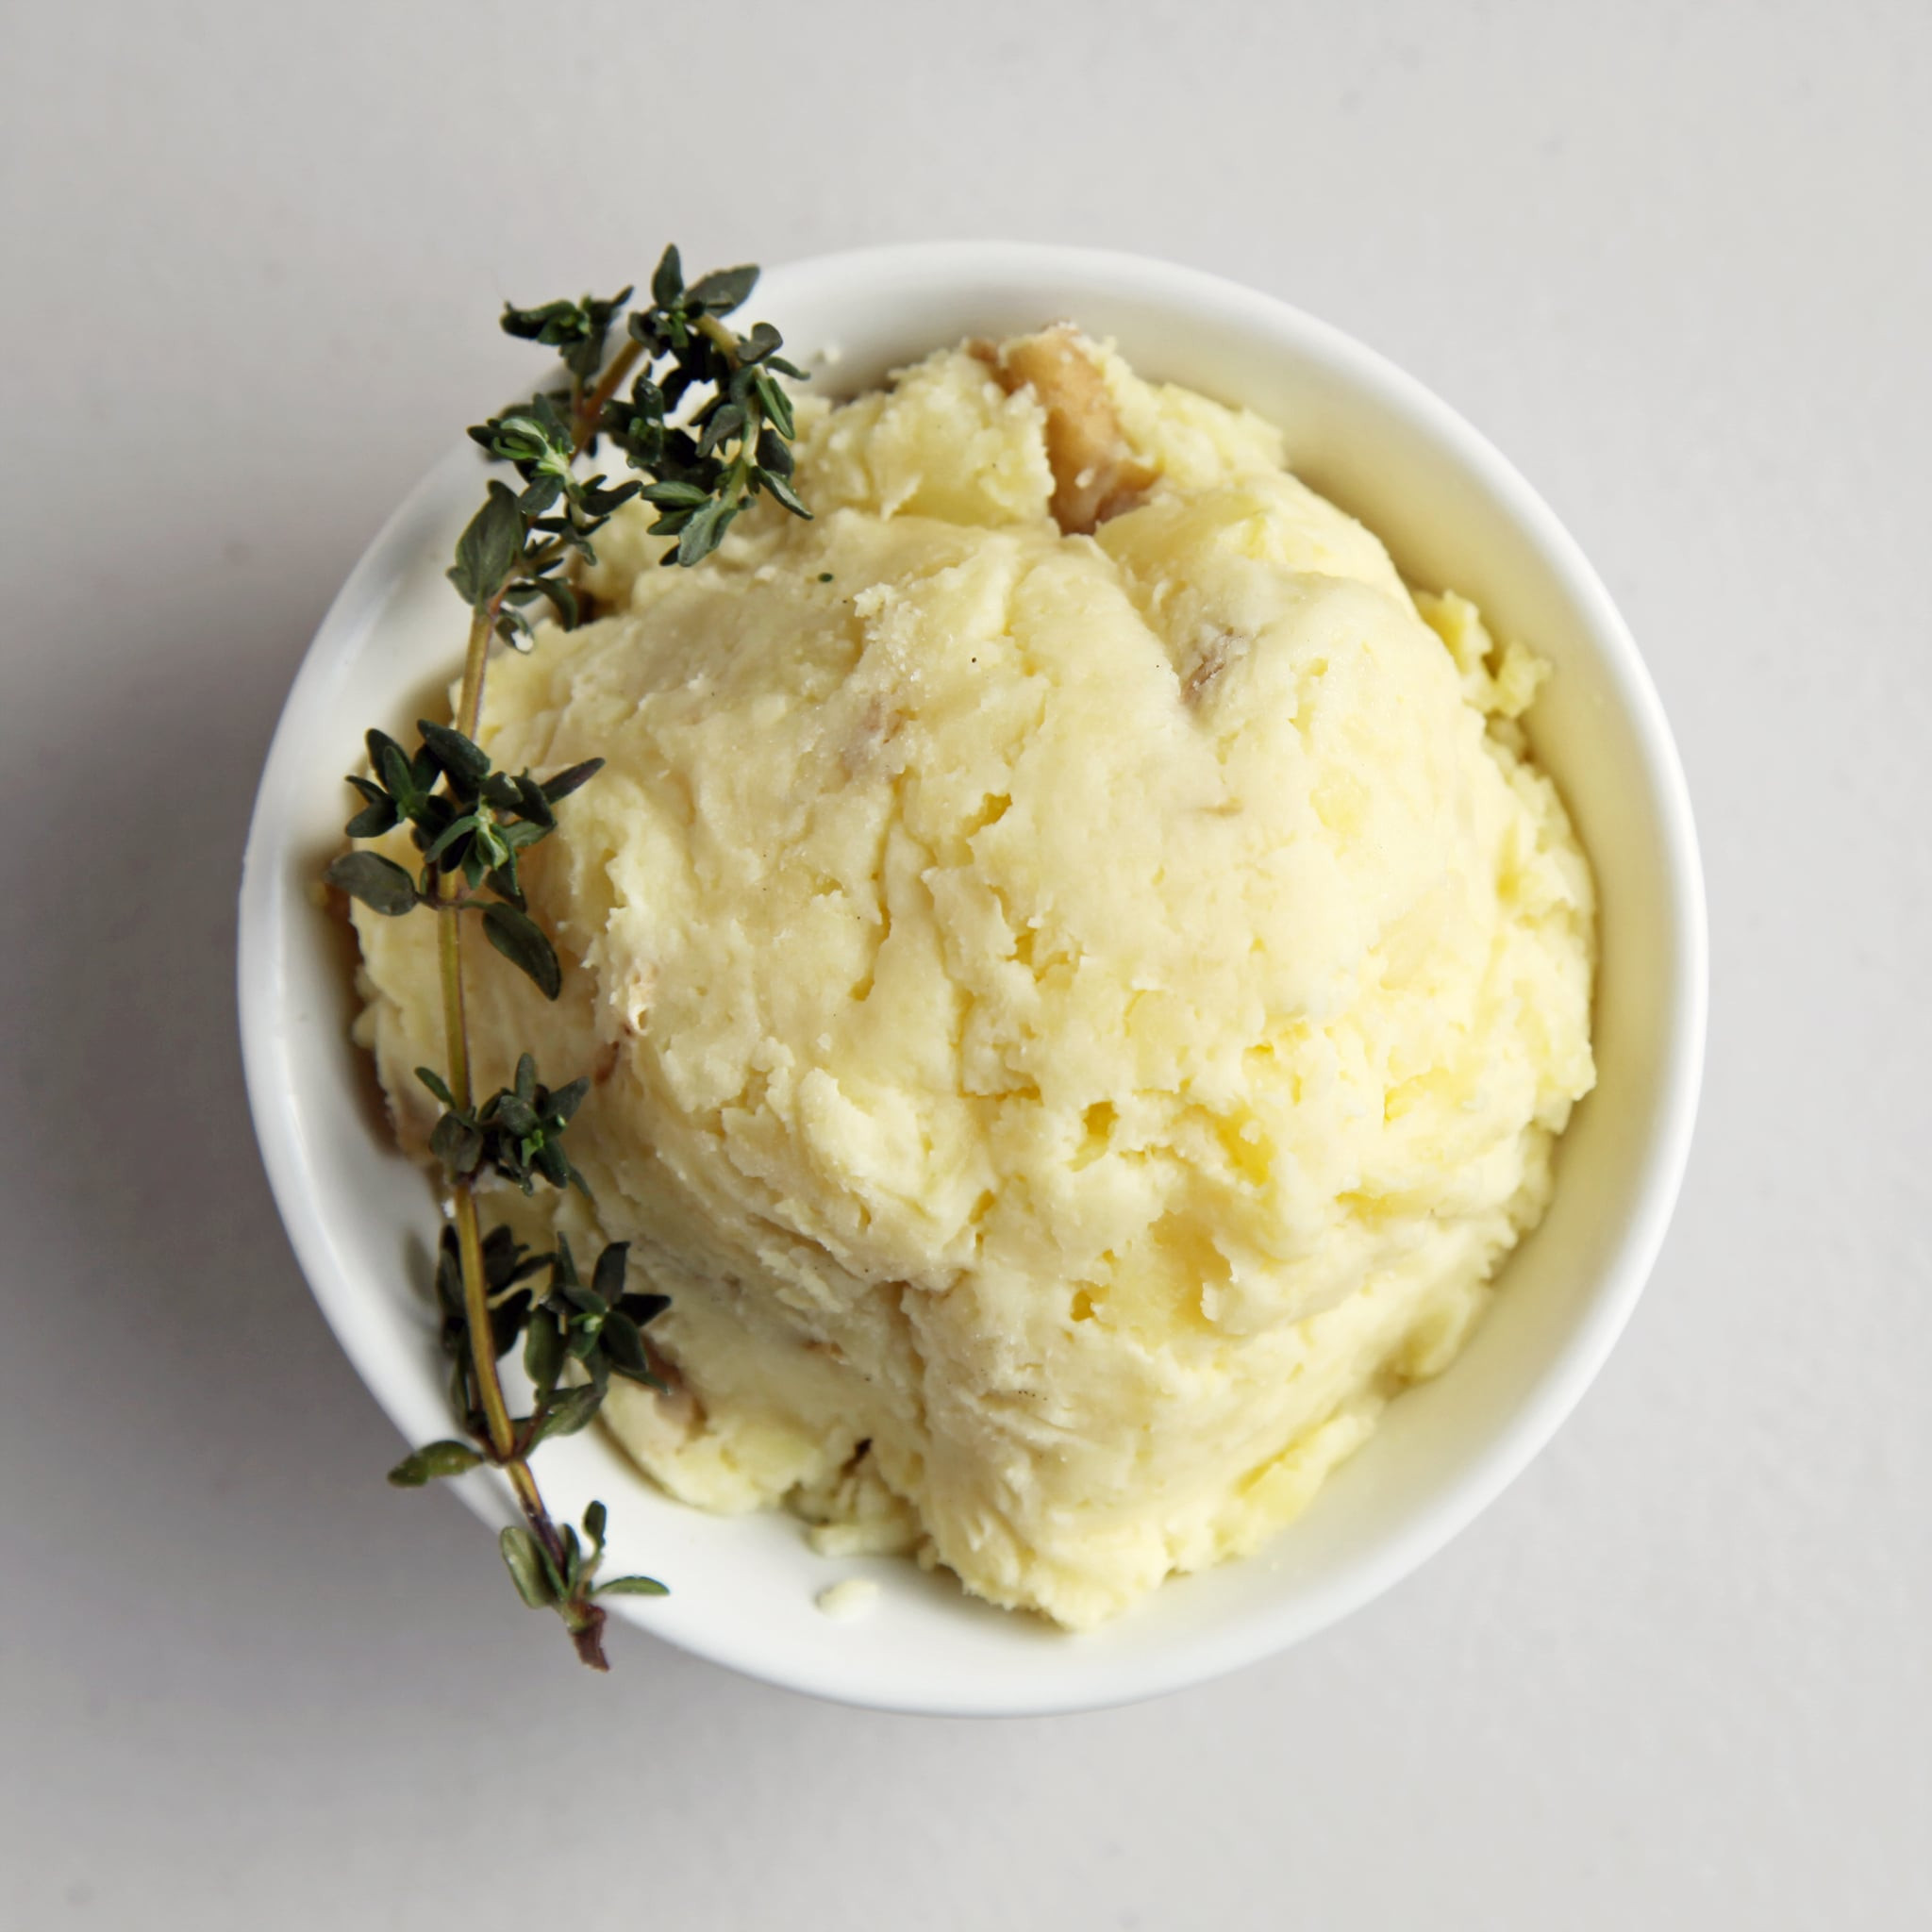 How Long Do You Boil Potatoes To Make Mashed Potatoes
 Tyler Florence s Mashed Potatoes Recipe